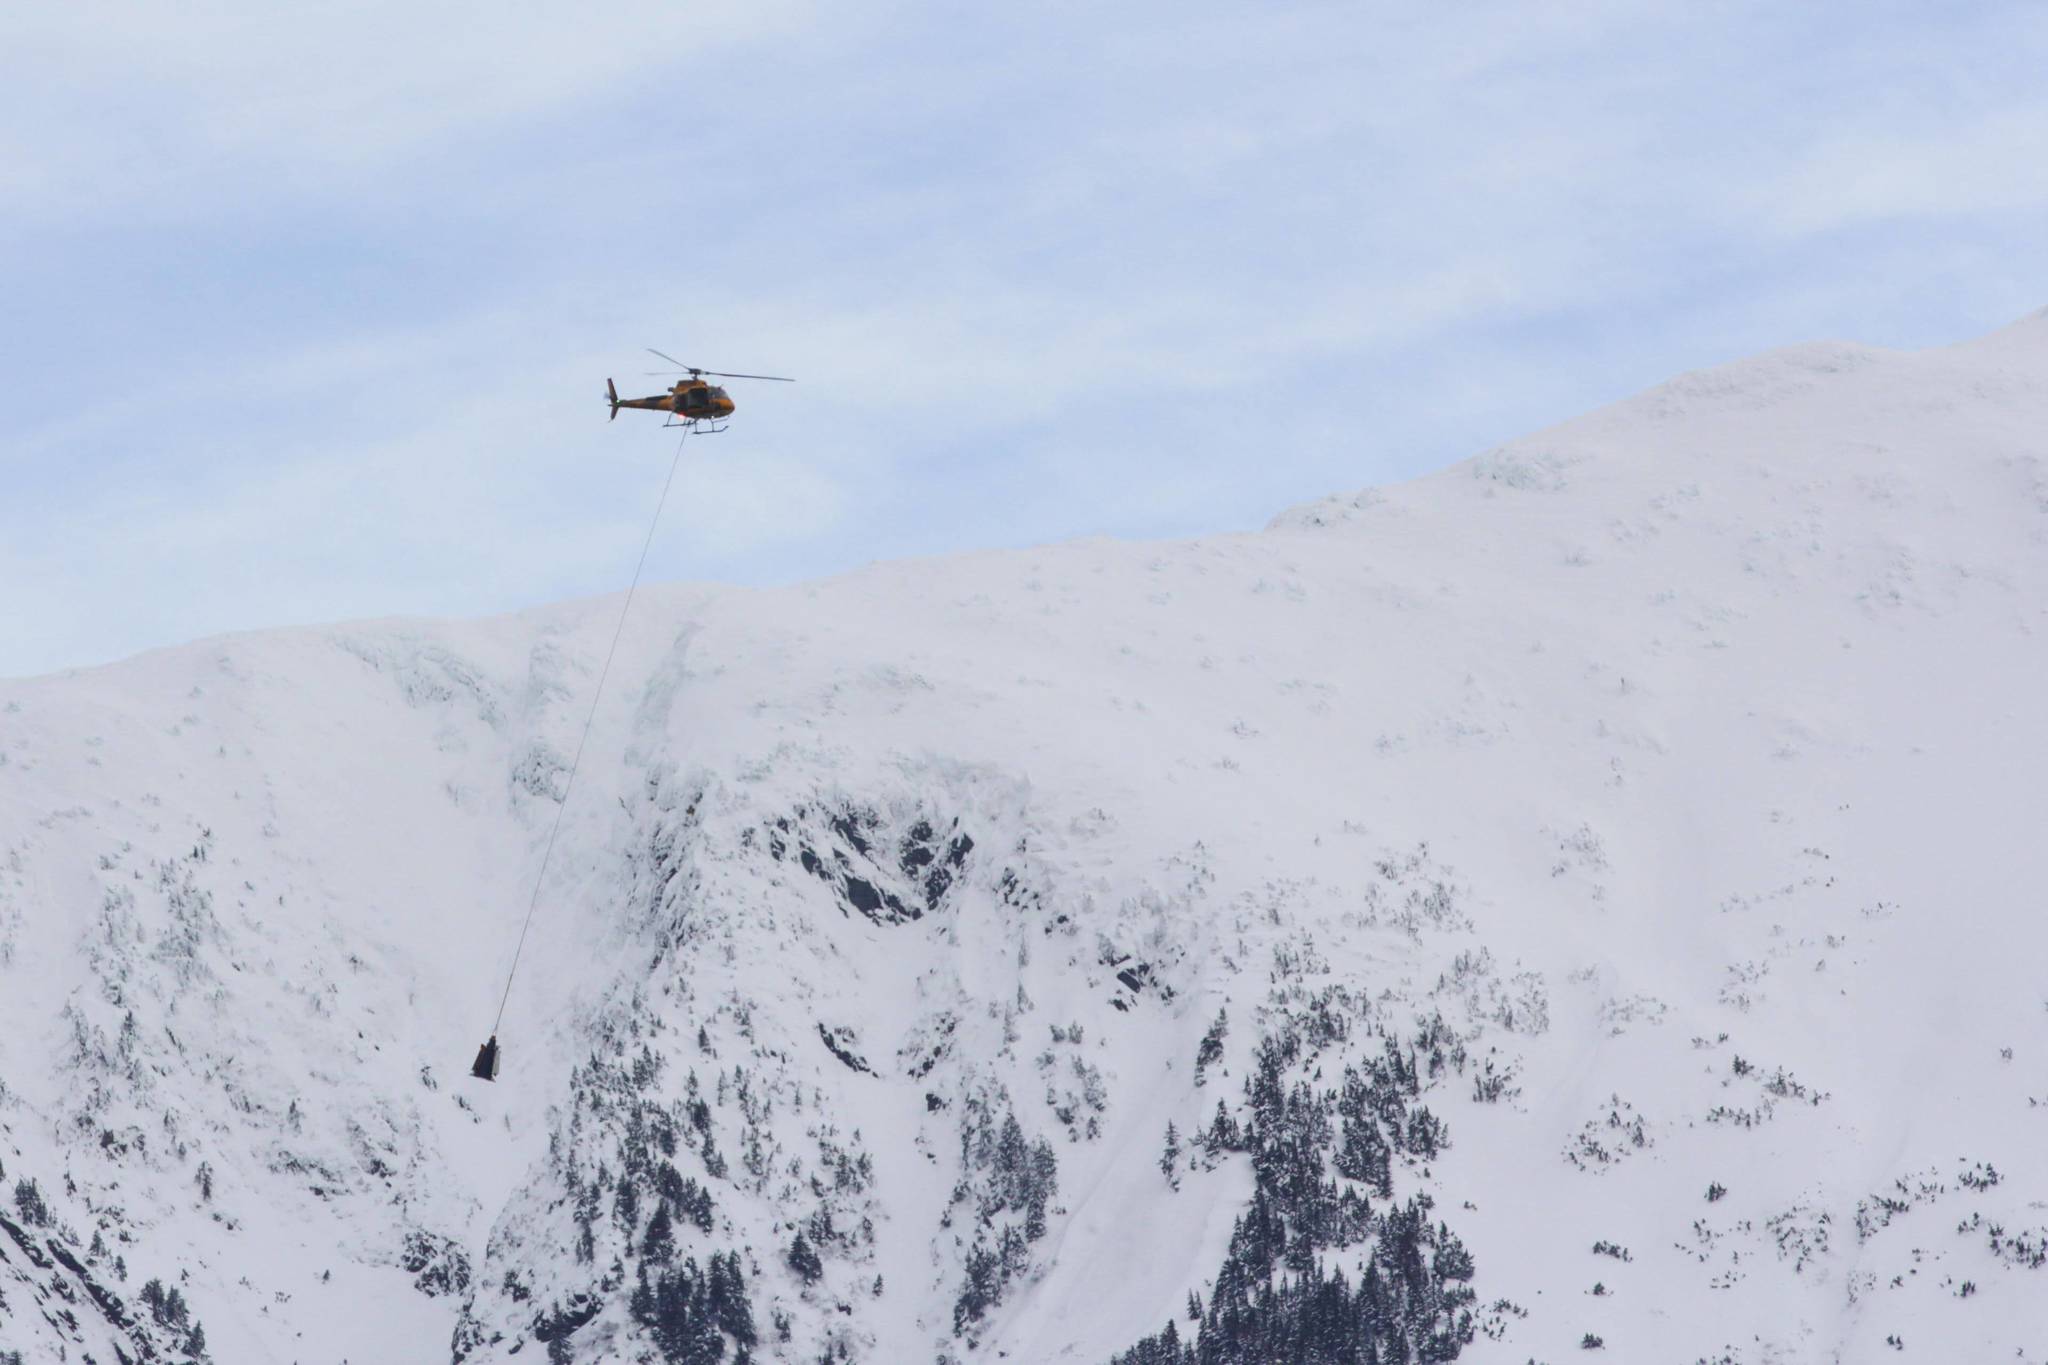 The Alaska Department of Transportation and Public Facilities, contracting with Coastal Helicopters, works to reduce avalanche risk on Thane Road by setting off avalanches in a controlled fashion on Feb. 5, 2021.(Michael S. Lockett / Juneau Empire File)